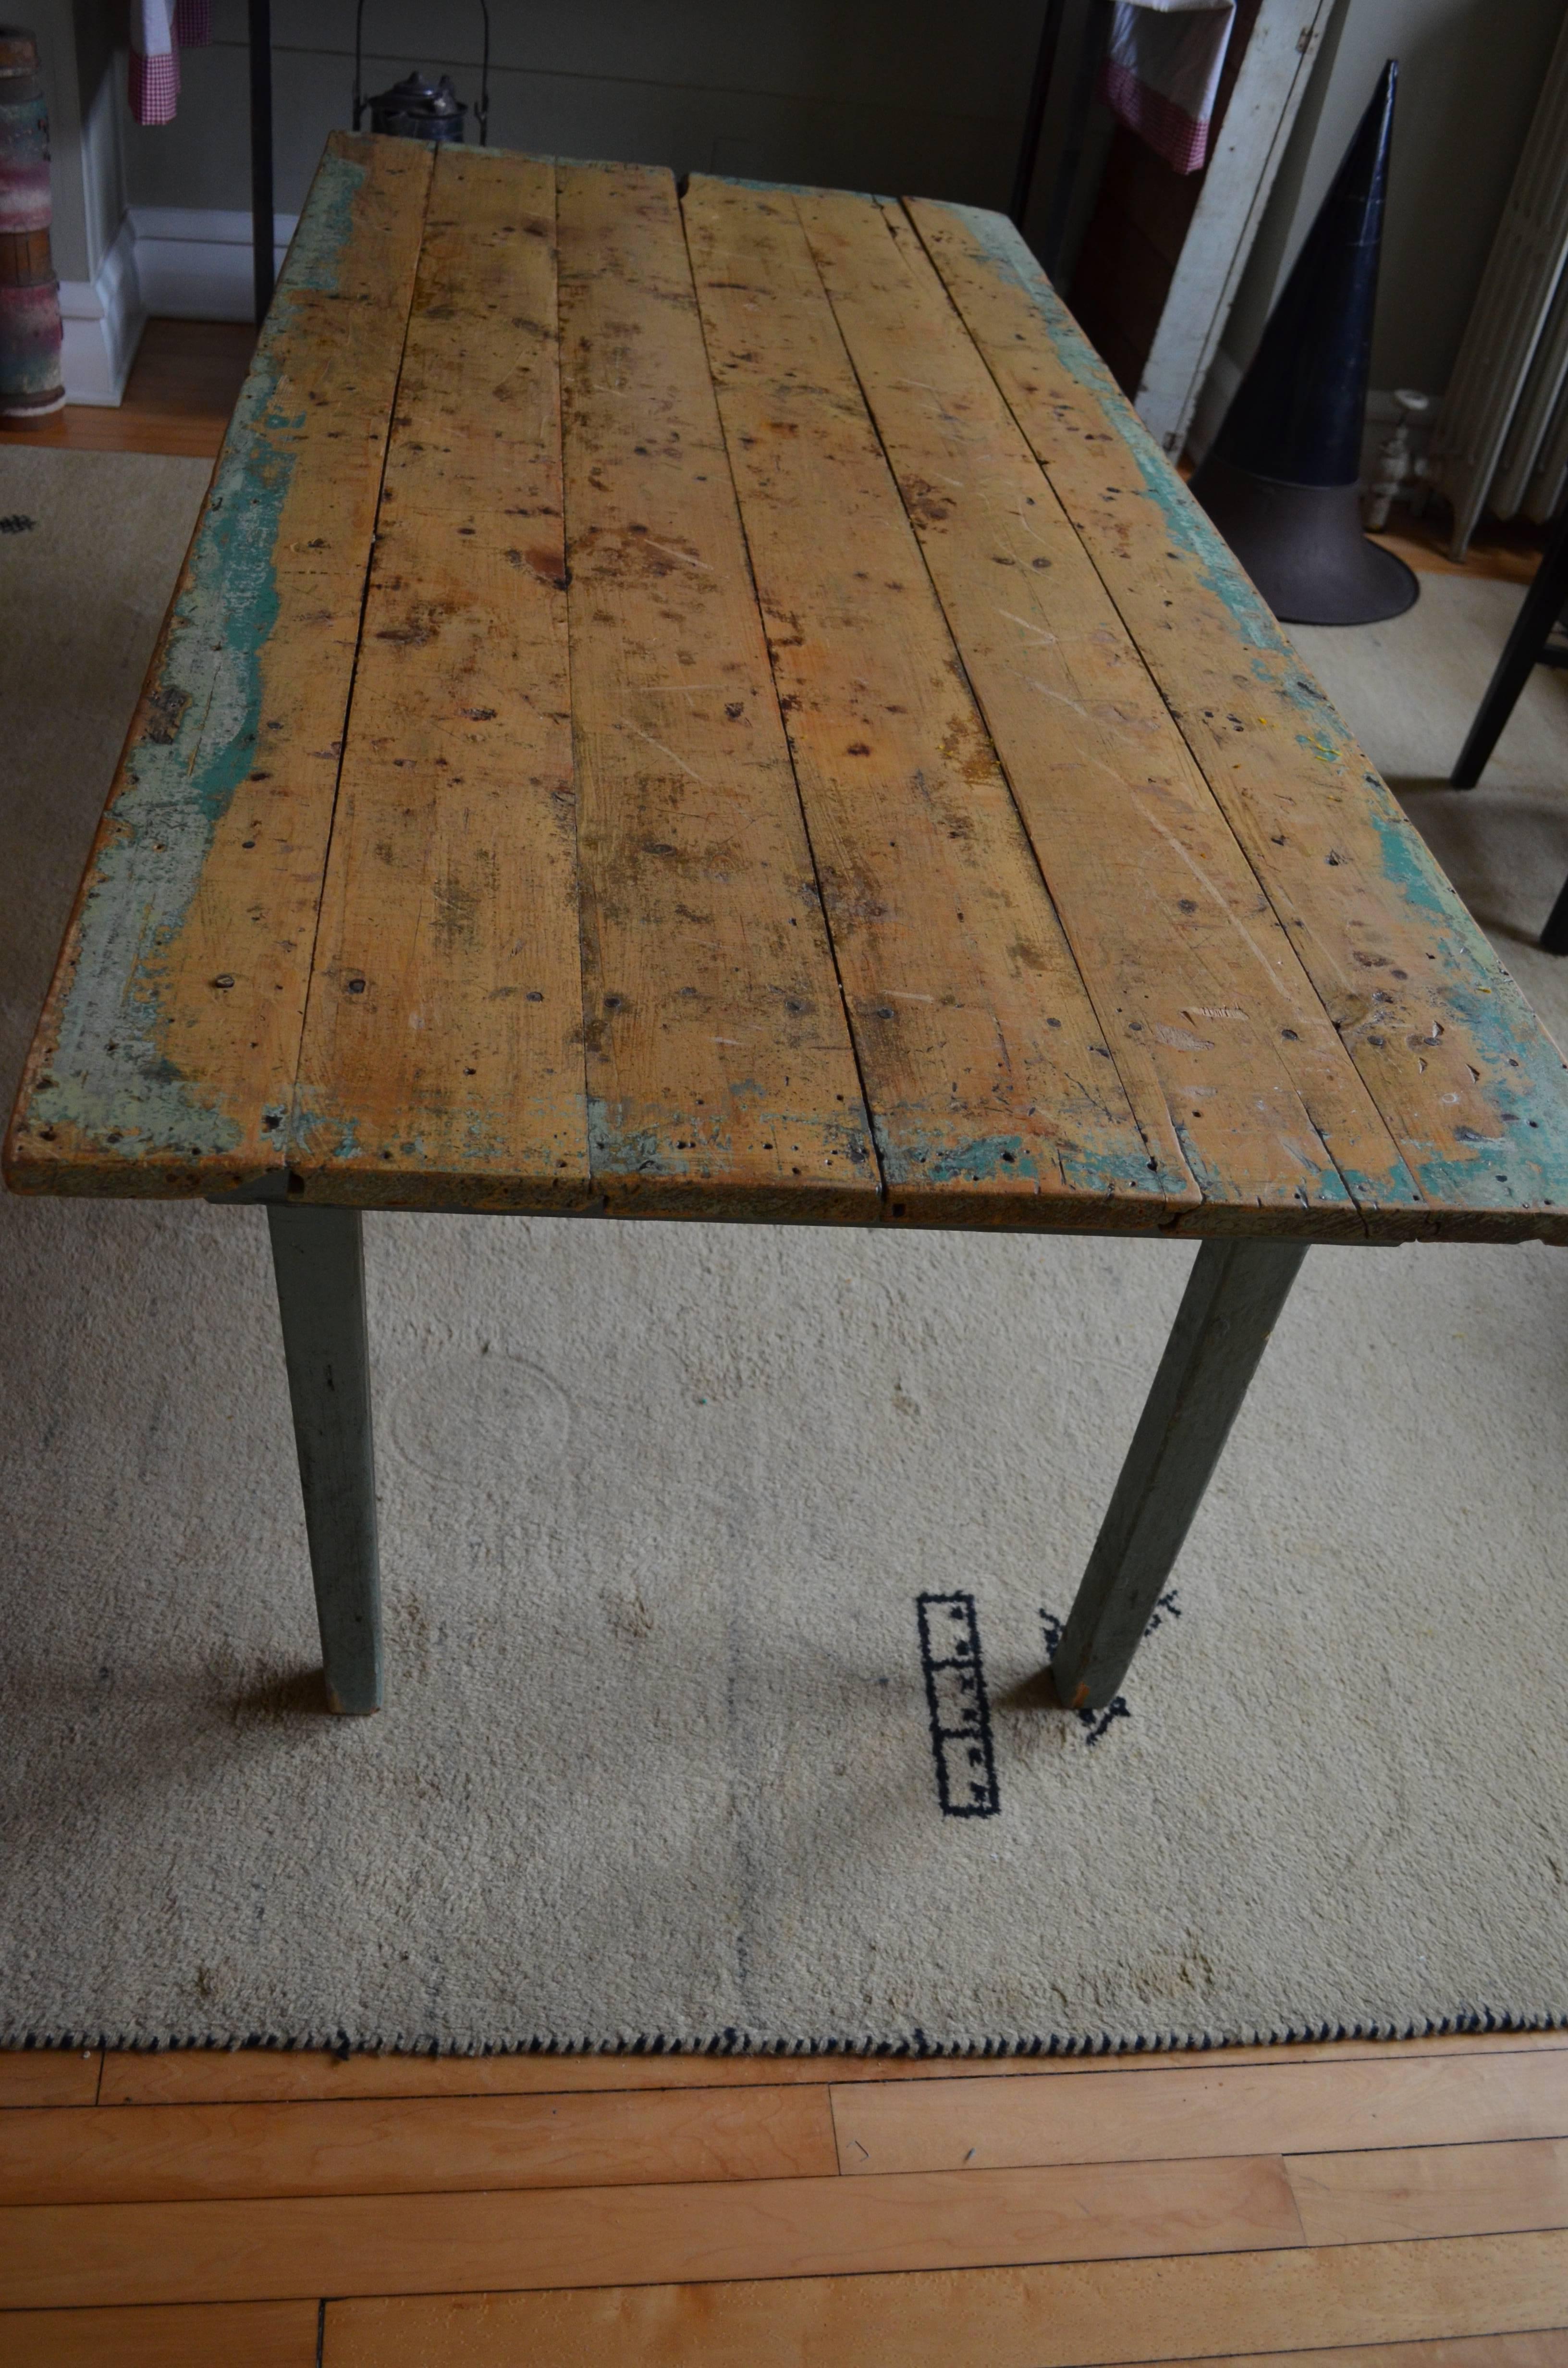 Vintage wooden table was used in early 1900s schoolhouse. Height of 23.75 inches is perfect for younger children. Great for doing homework, after school play, kids' snacks. When they've grown out of it, you've got yourself an antique resonating with